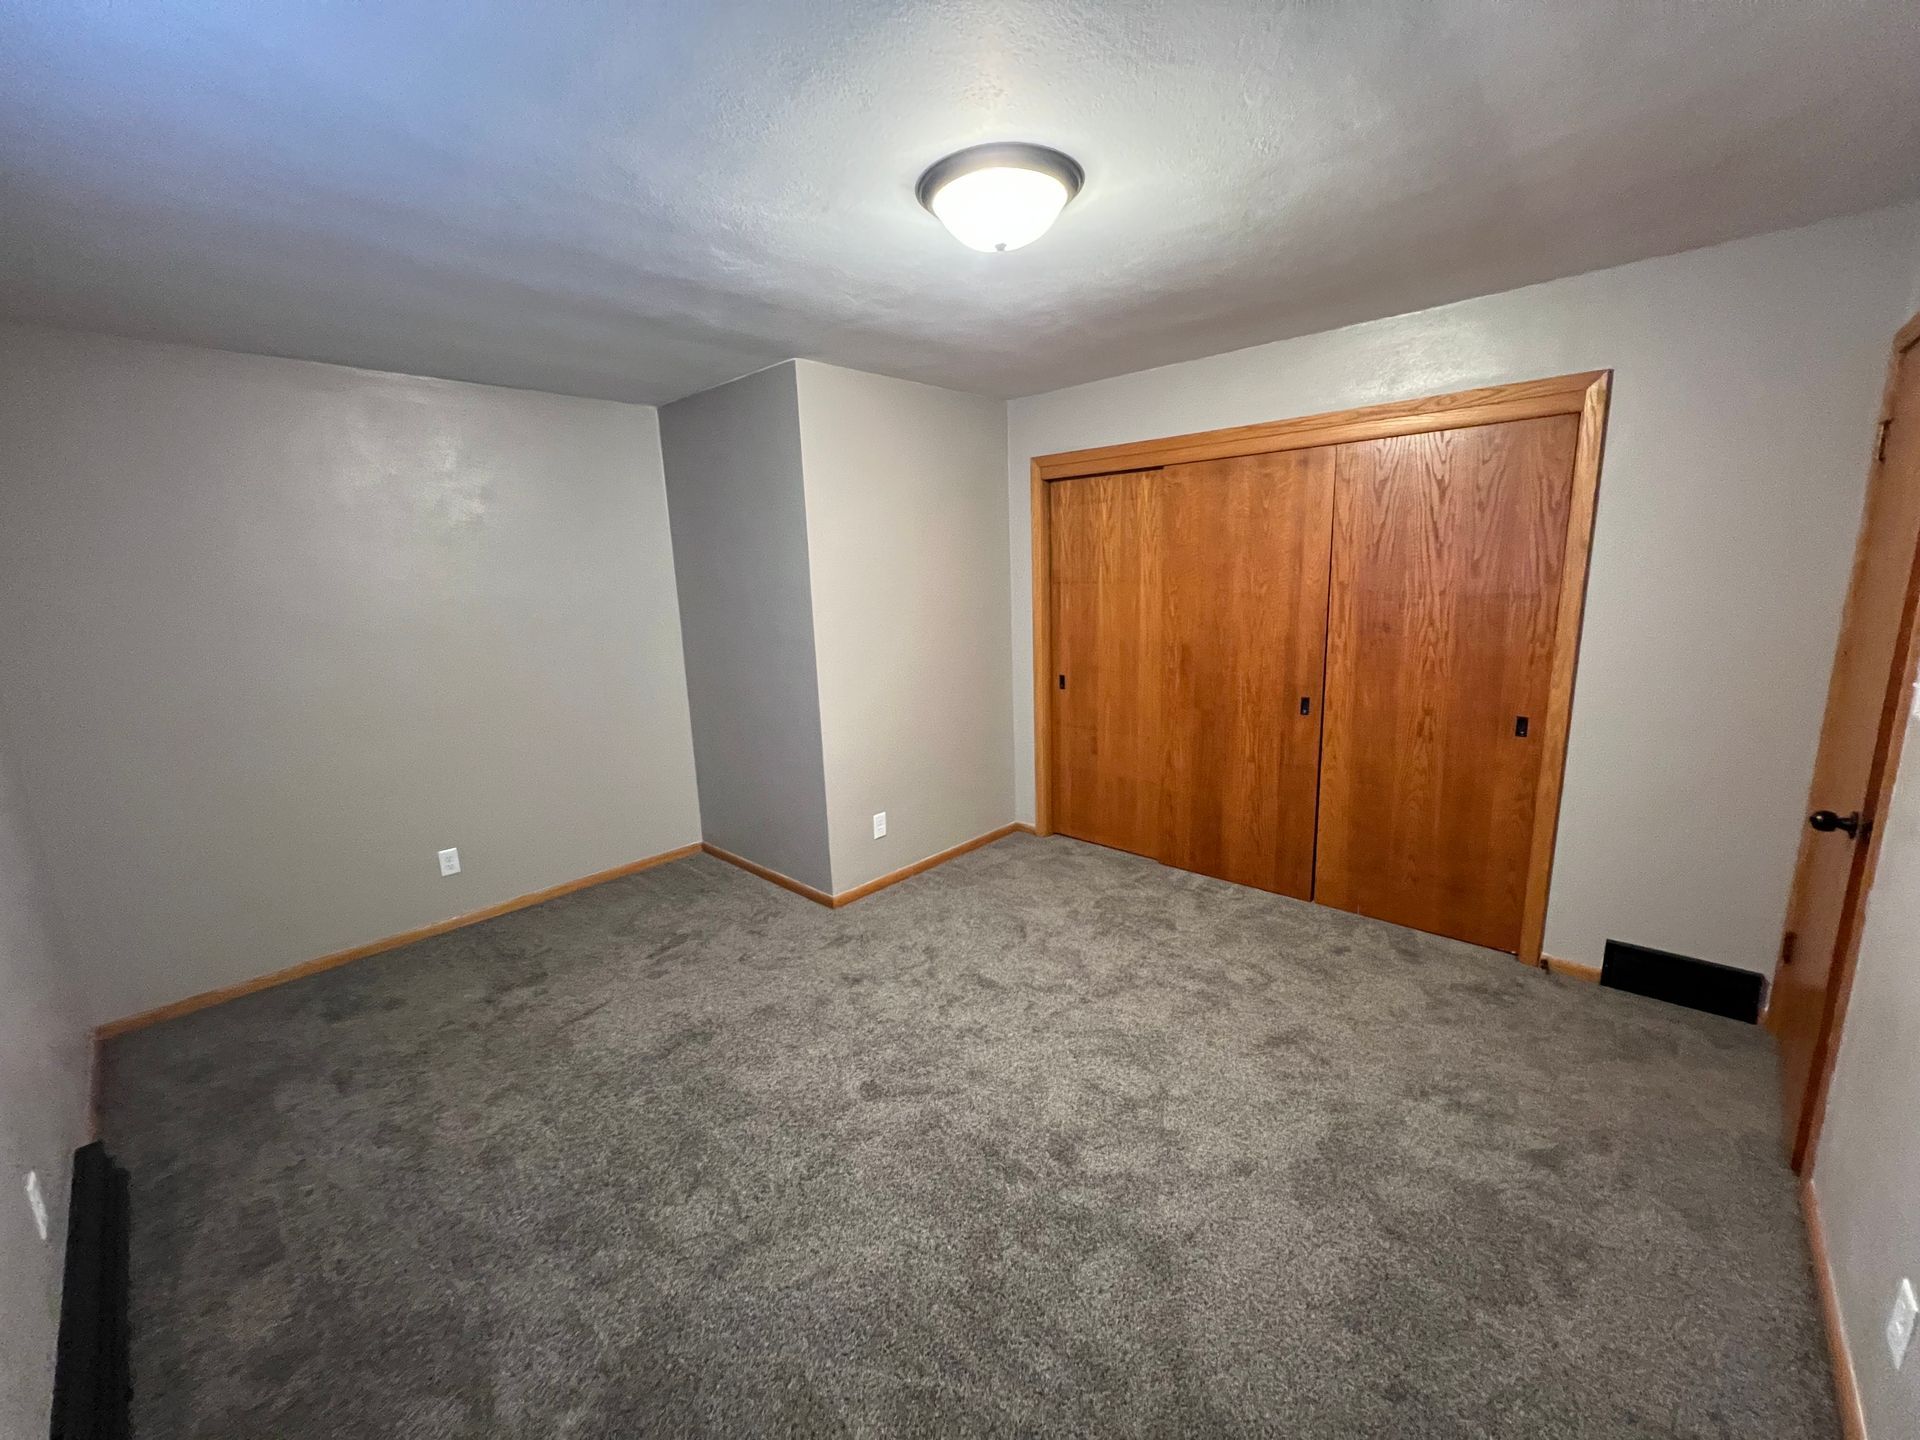 There is a large closet in the corner of the room.